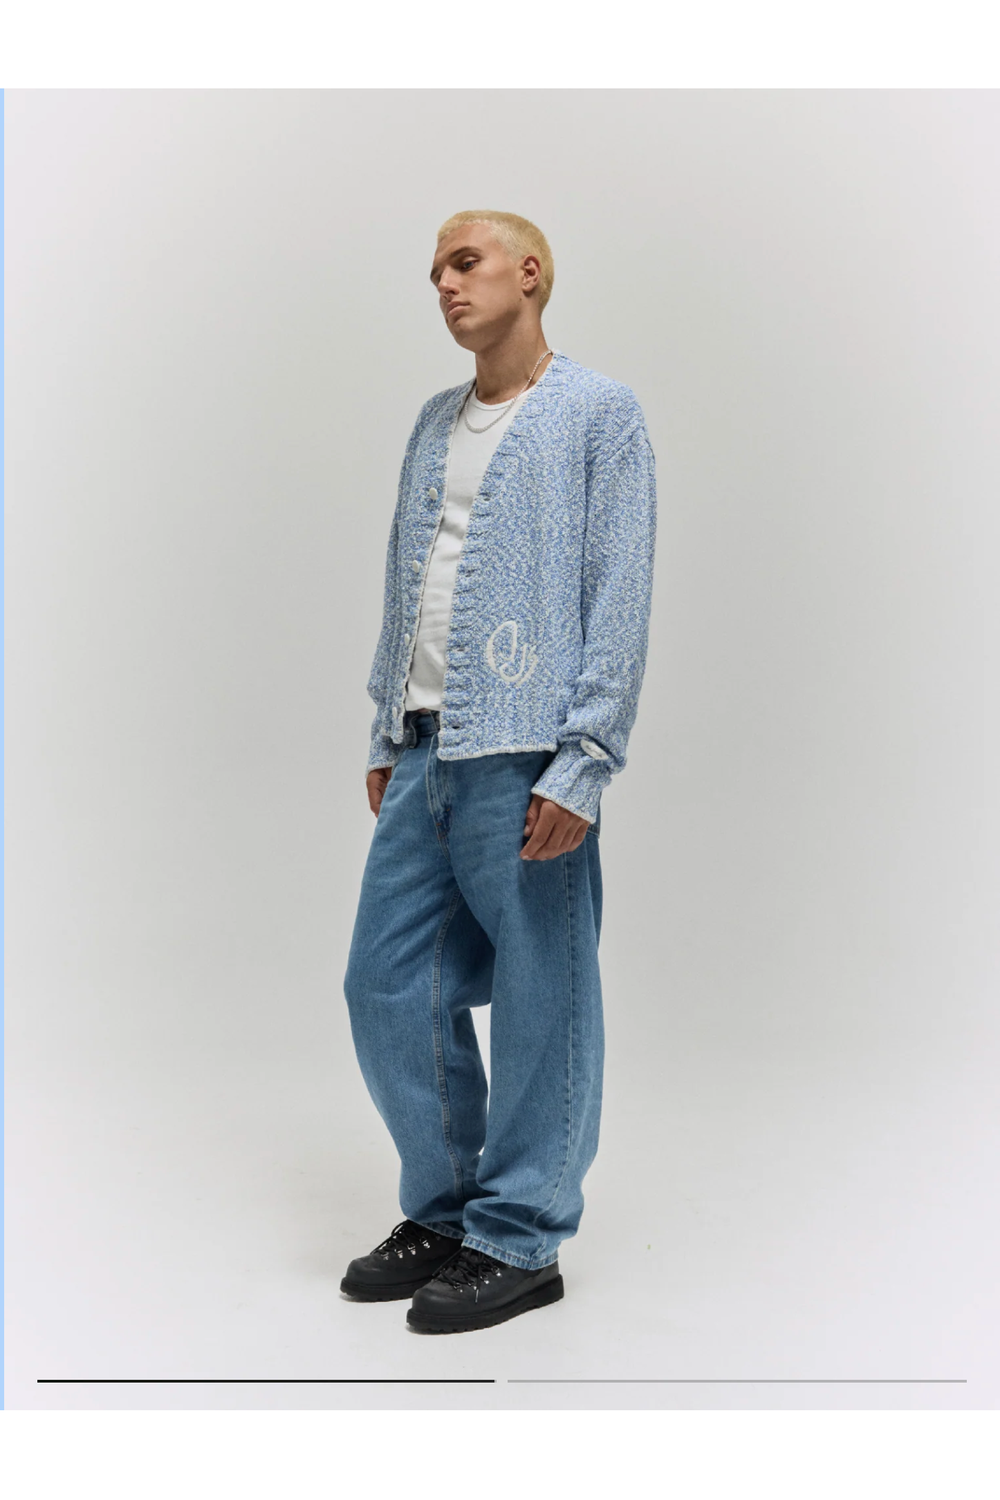 Boxed Knit - Blue Melange W Whip Stitch | PORTER JAMES SPORTS | Mad About The Boy